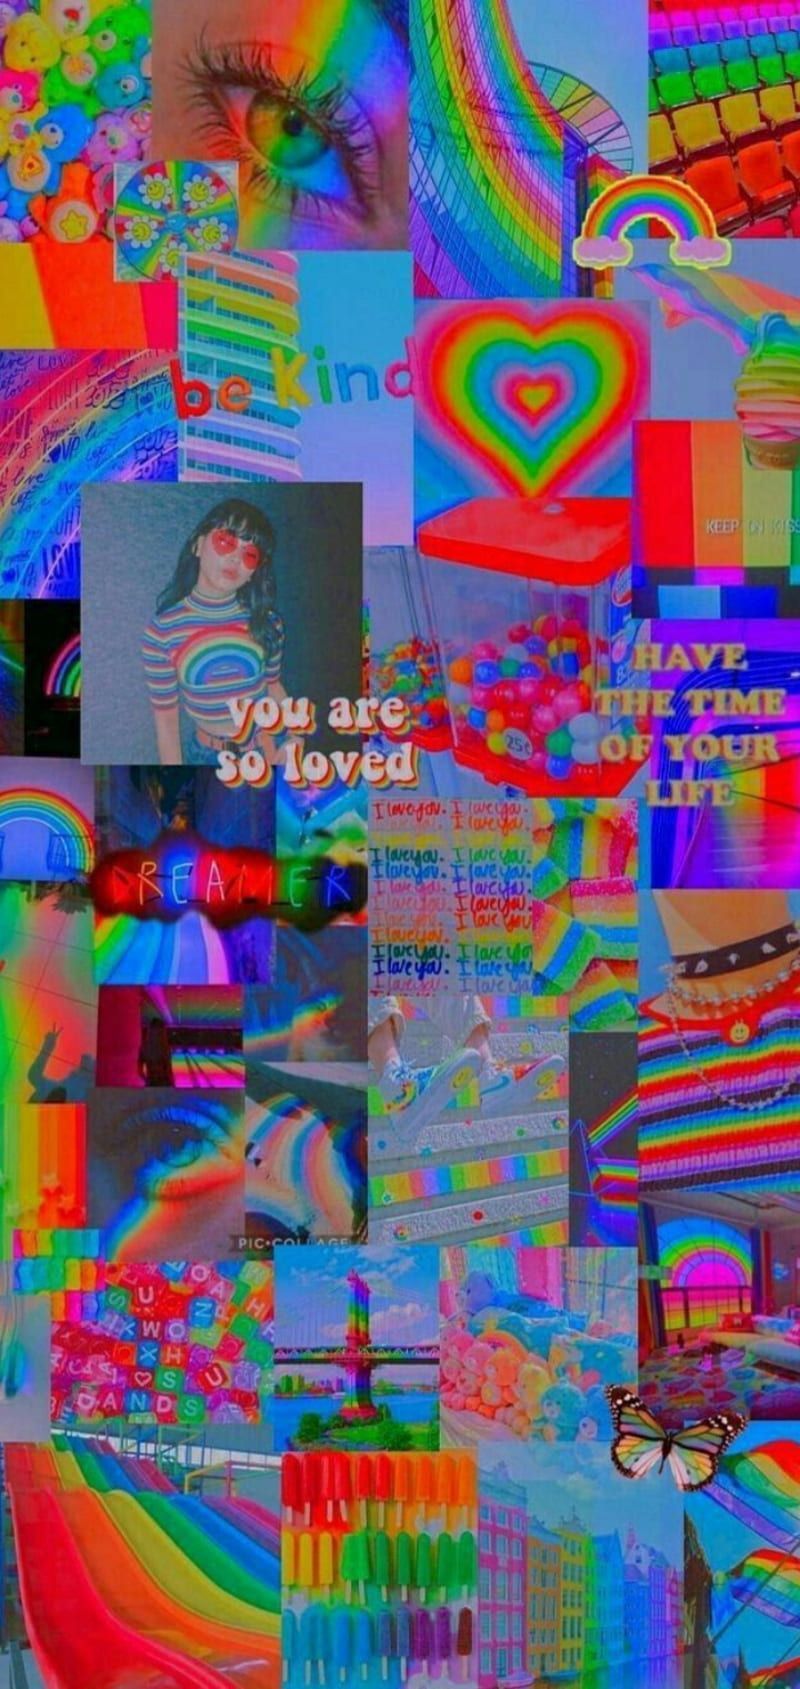 A collage of colorful images with text - Indie